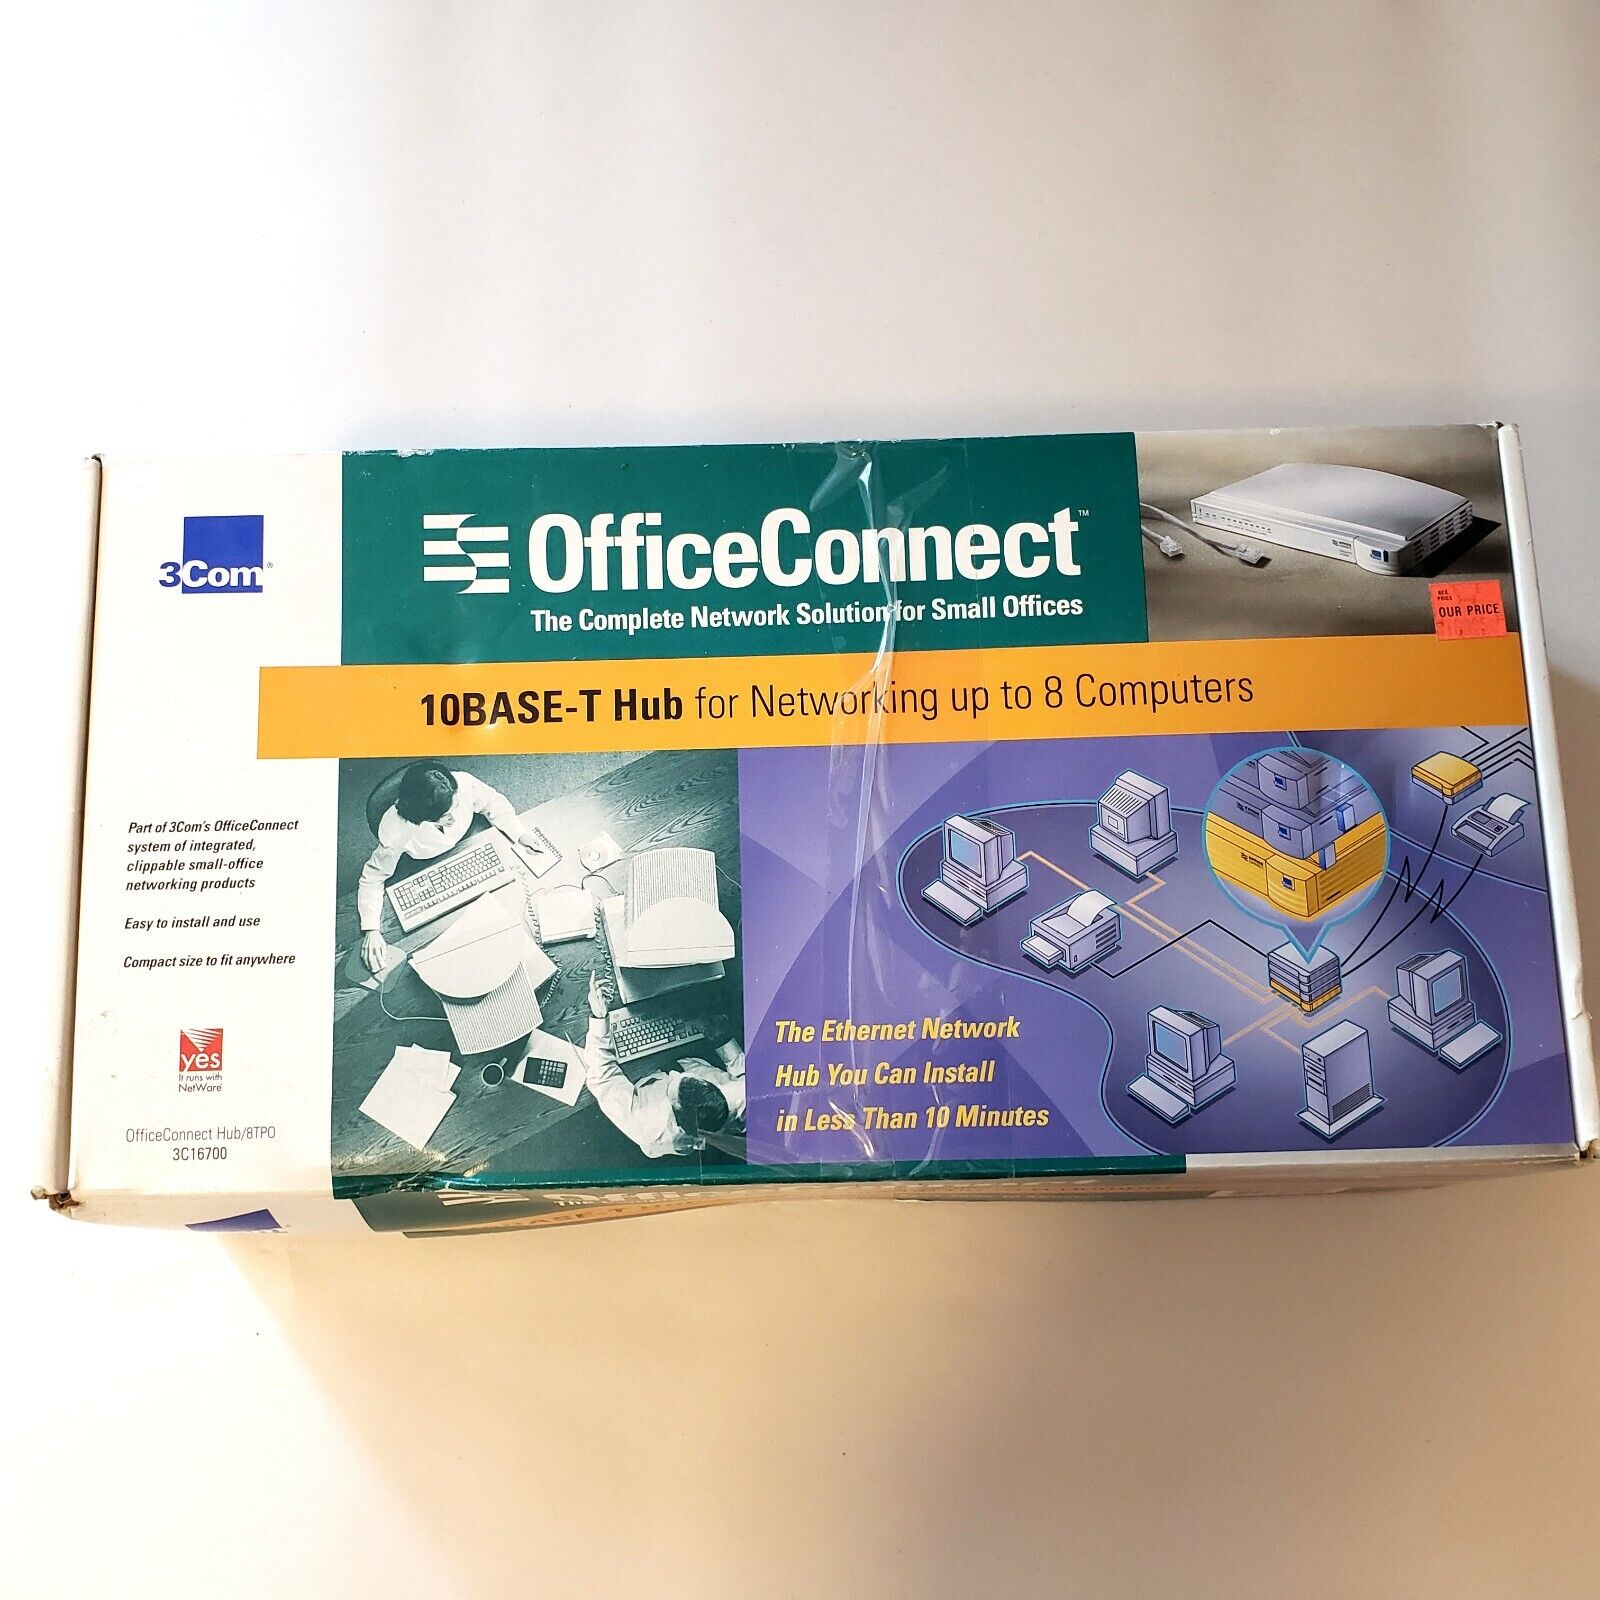 3COM Office Connect Managed 10Base-T Hub for Small Business 8 Ports